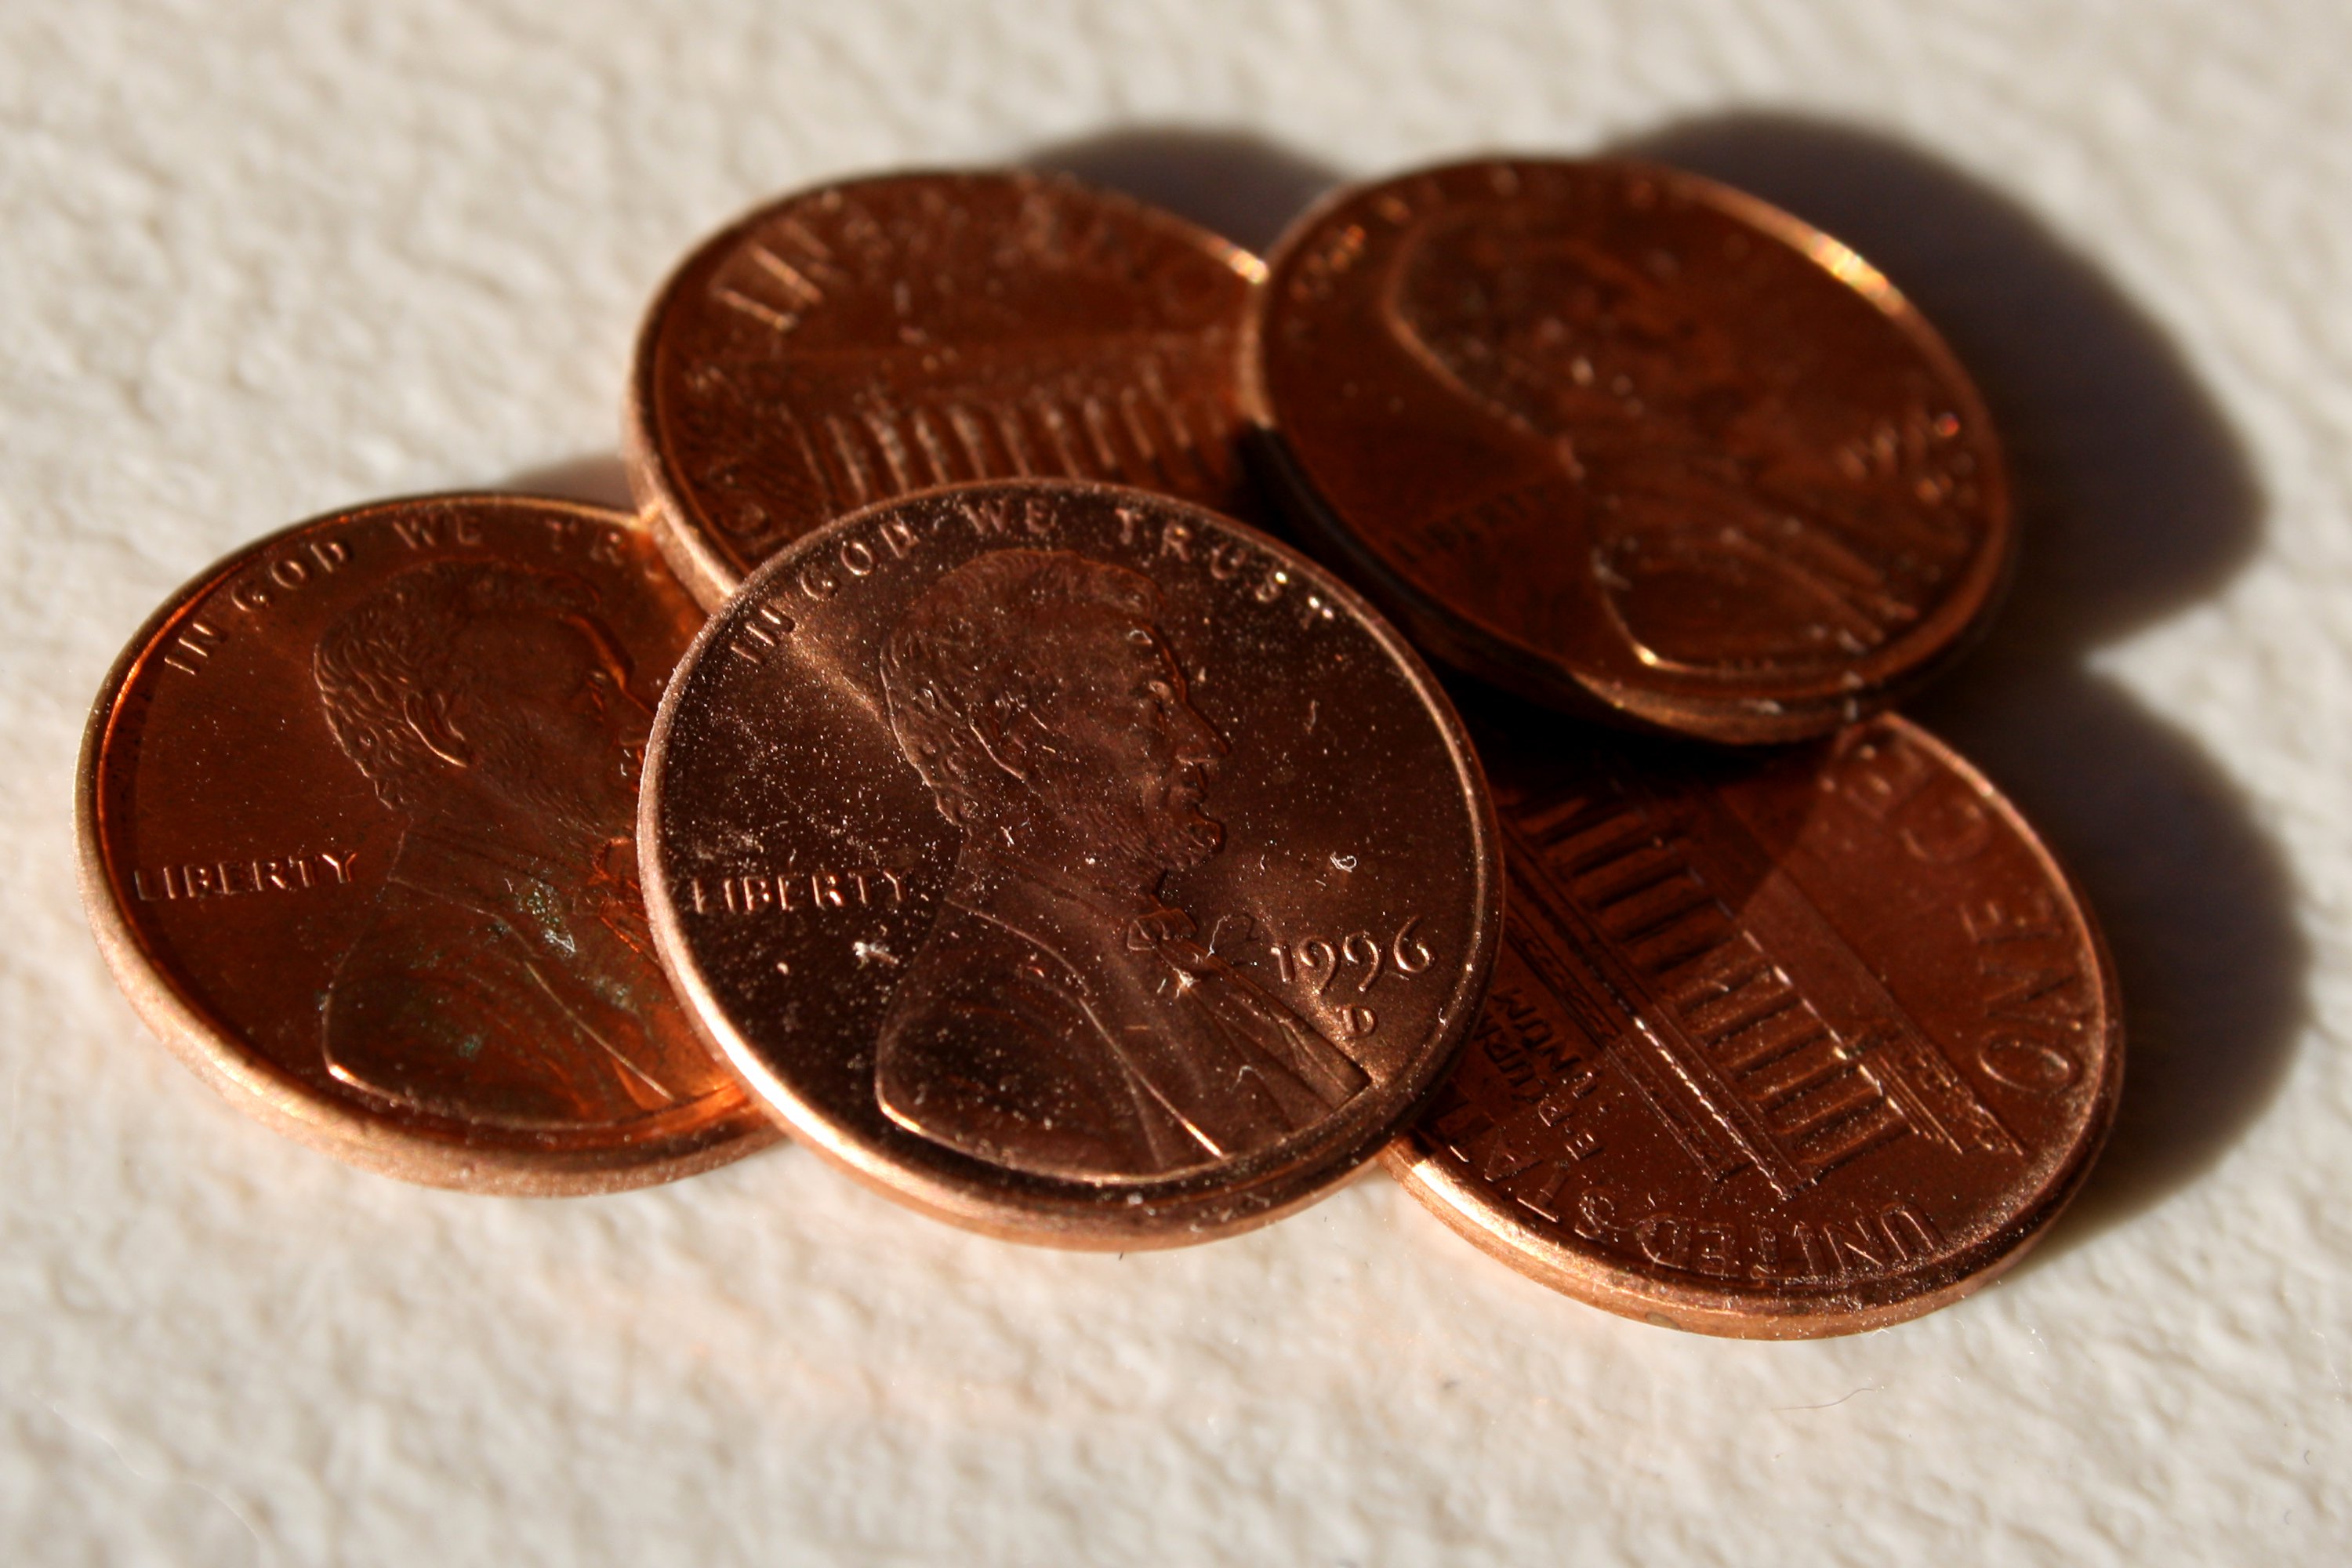     Five United States Copper Pennies  This Picture Is Free For Any Use